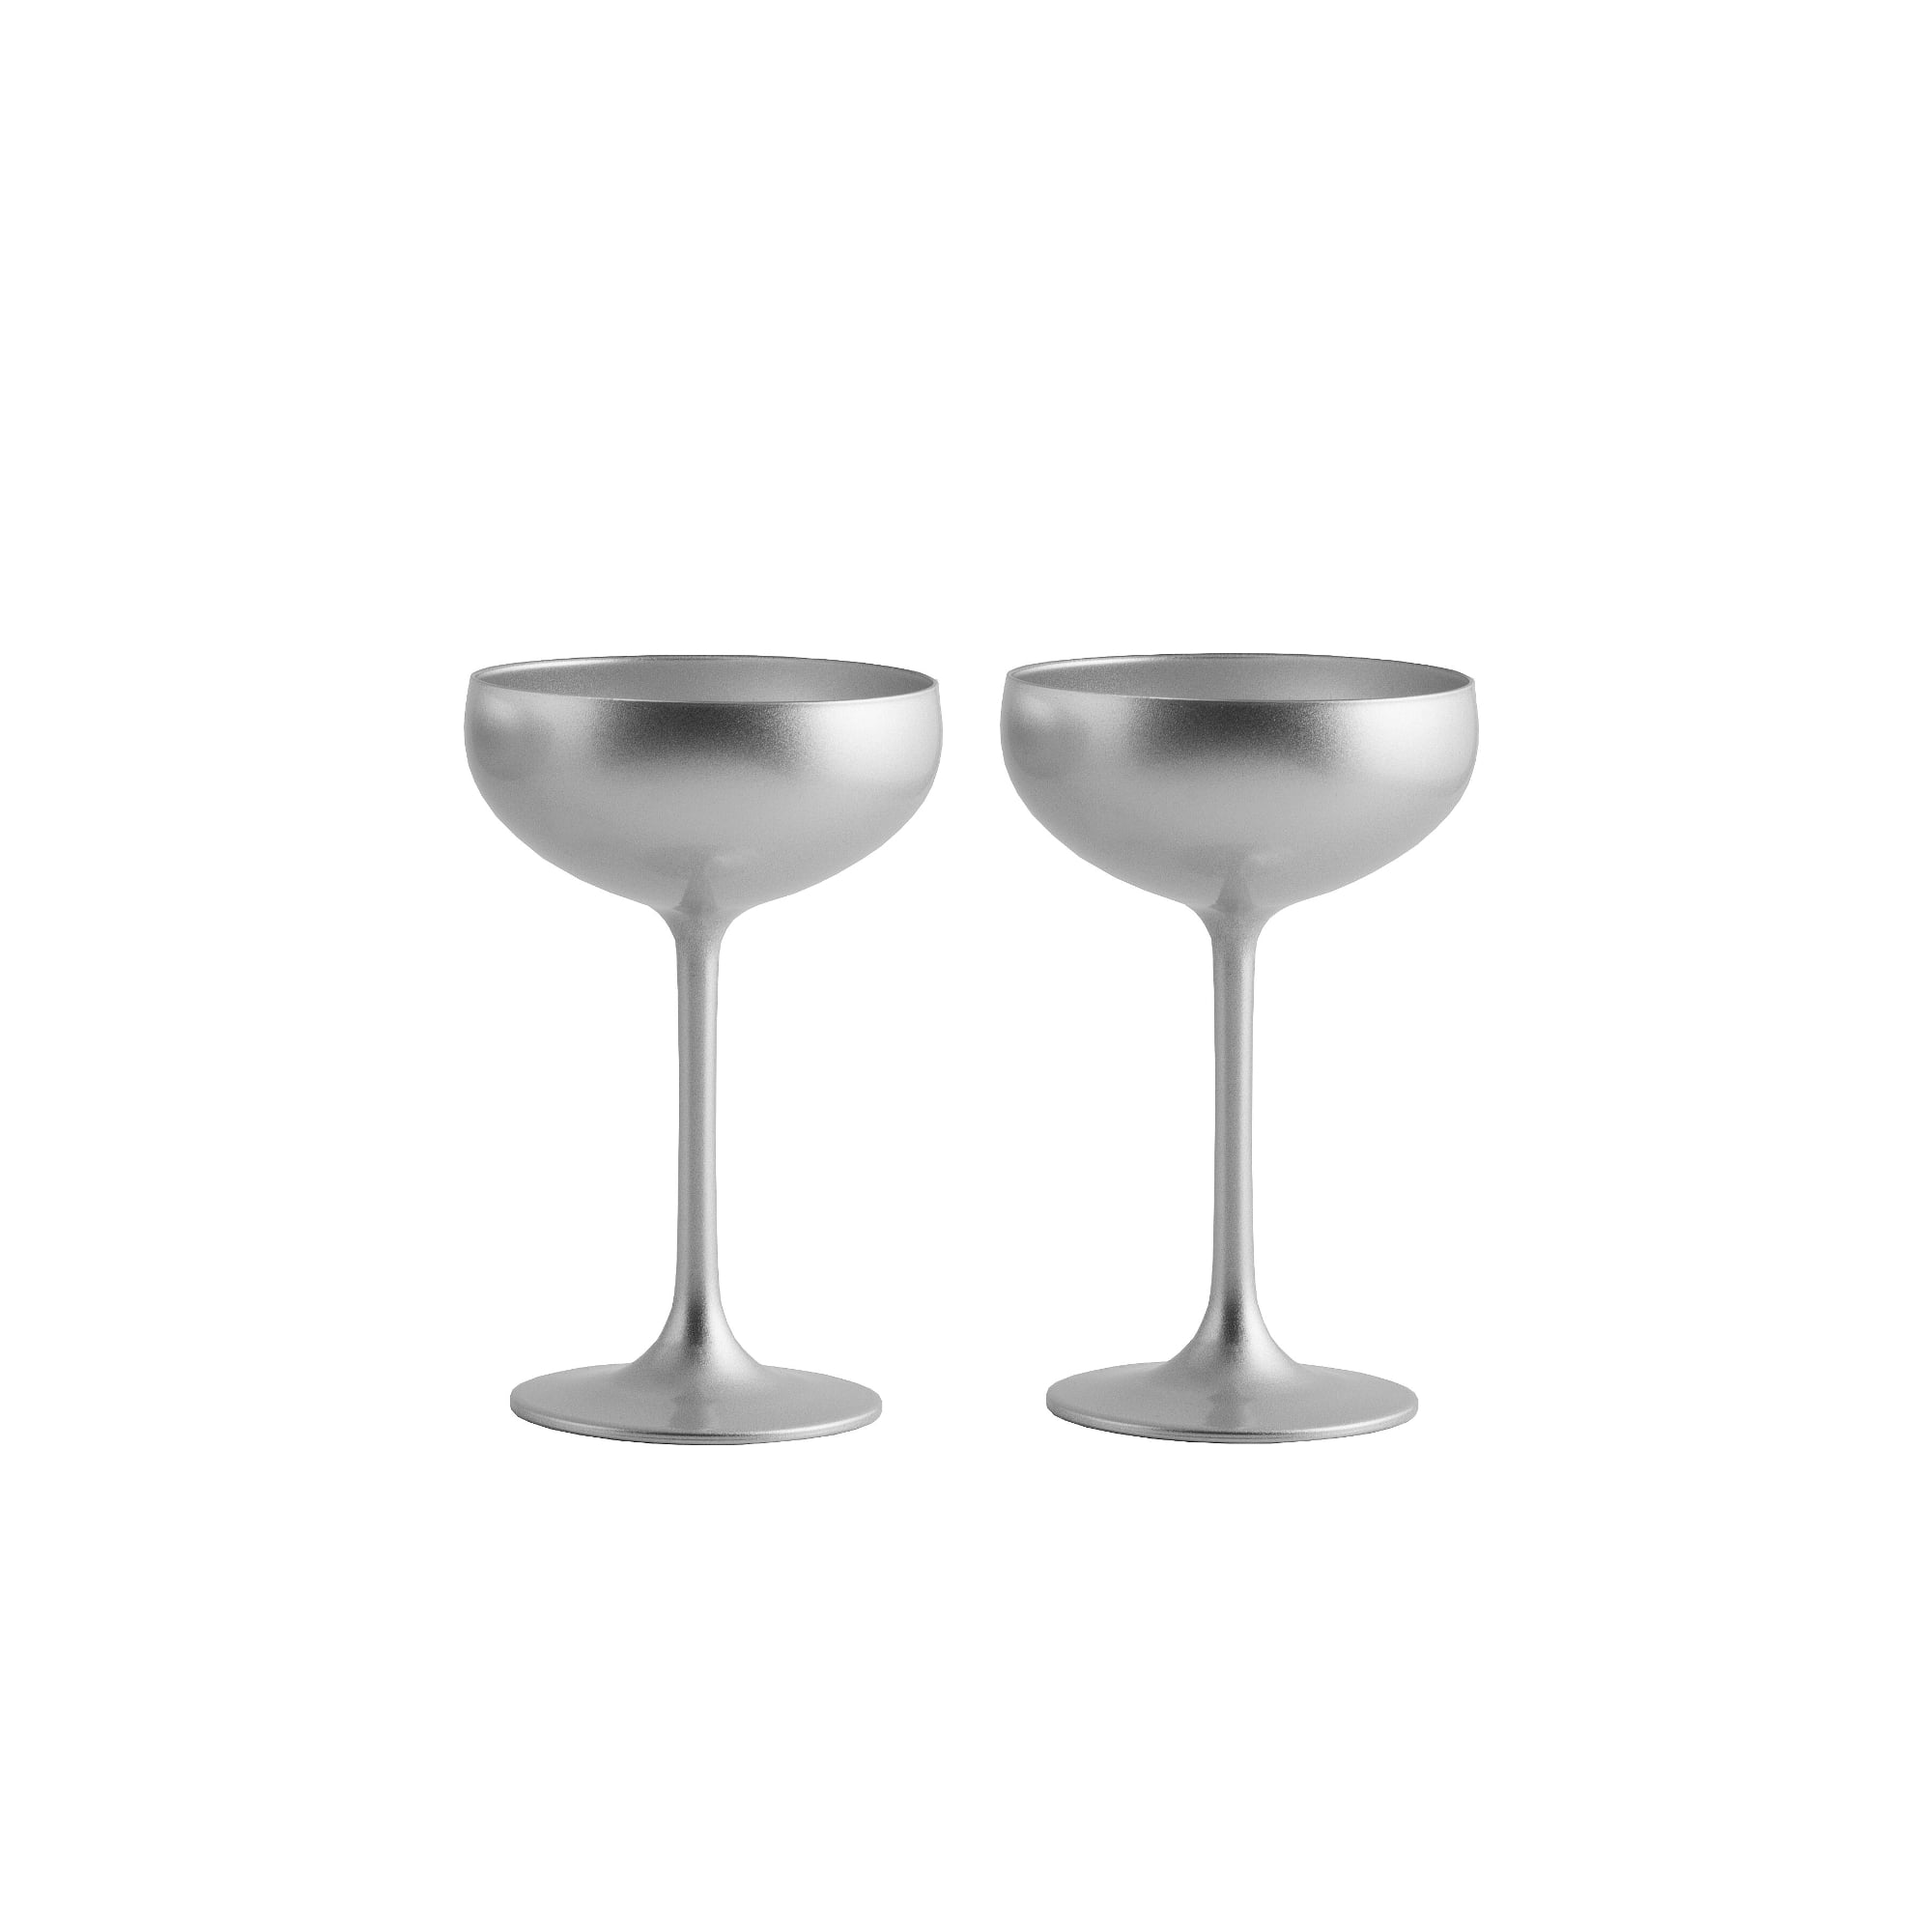 Stolzle Lausitz Olympia Silver Champagne Saucer Coupe Glass, Set of 2